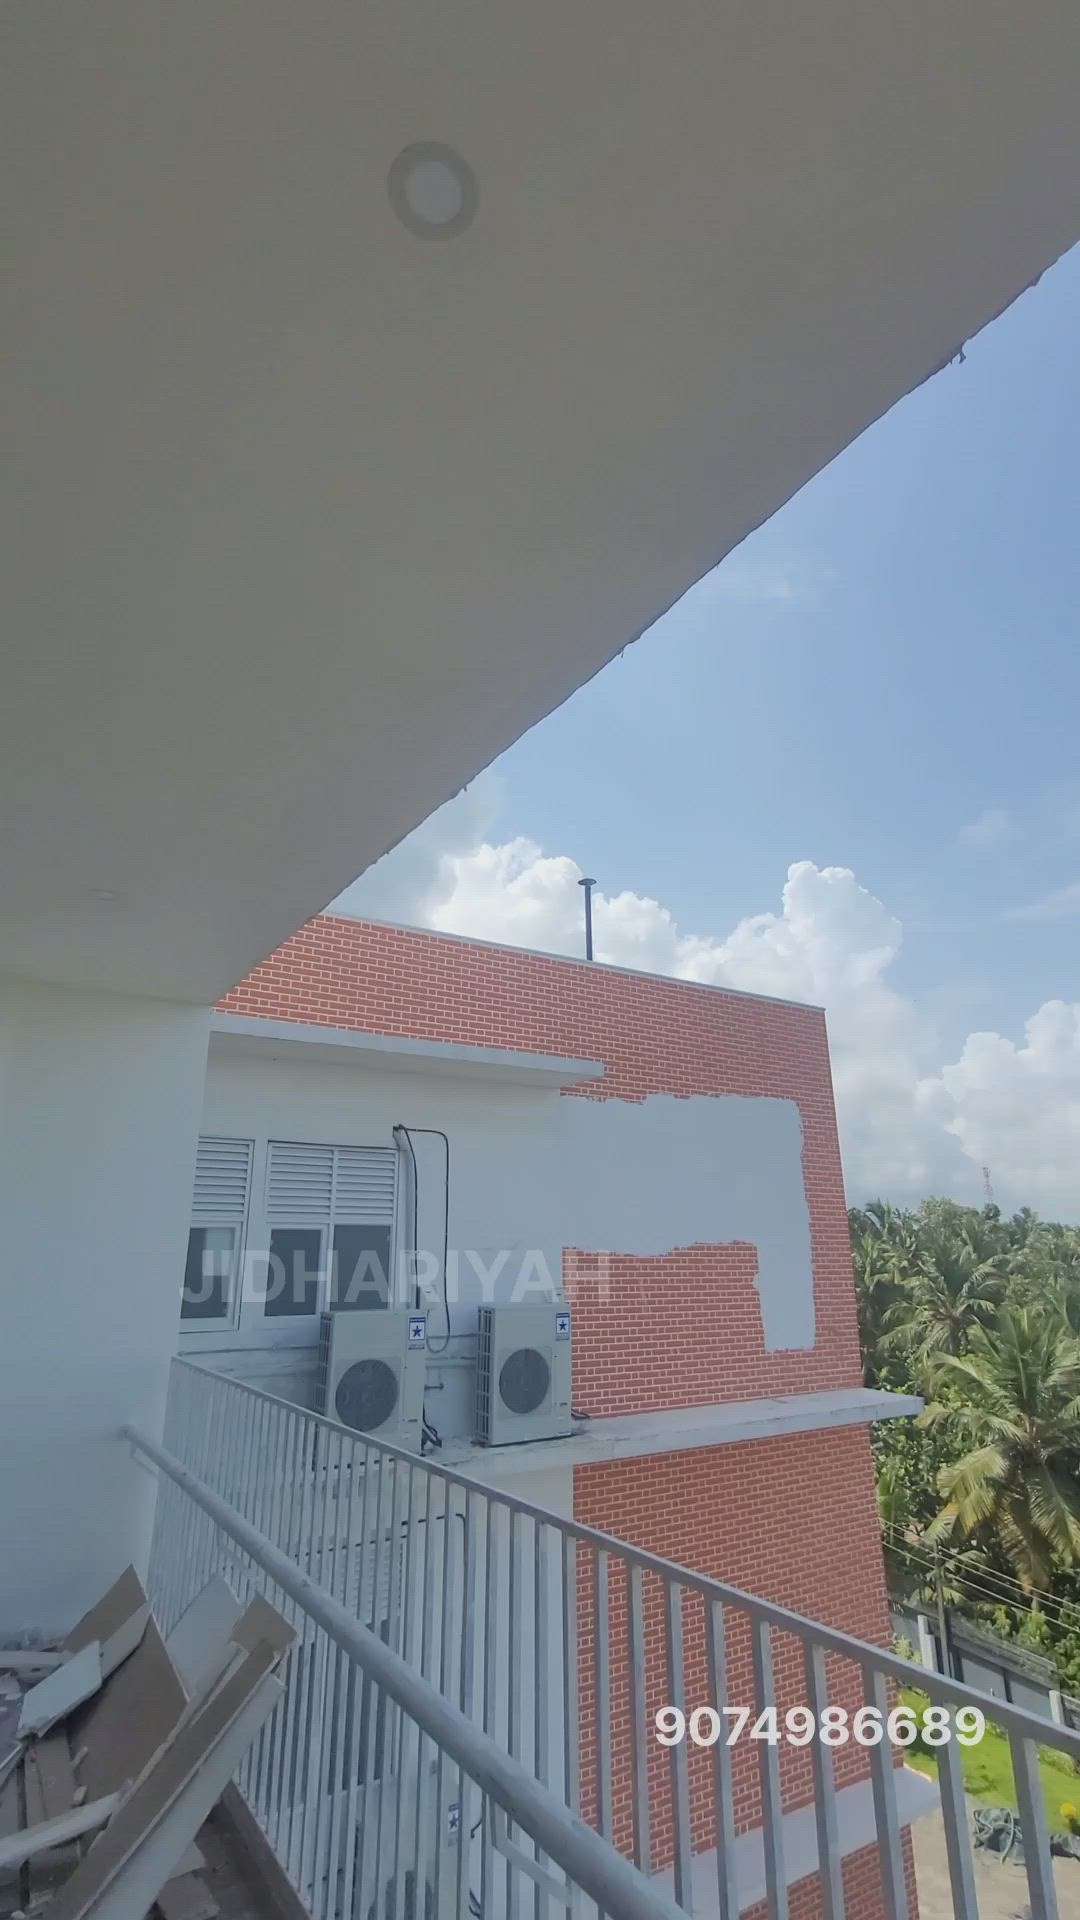 Completed site at Trivandrum 📍
Ceiling done with WPC fluted panels ⚡
.
.
.
#wpcwork #wpcpanel #AcousticCeiling #ceilingdesigns #Architectural&Interior #interiordesign  #architecturedesigns #upvc #wpc #creativity #newdesign #trivandrum #panellight #newmaterial